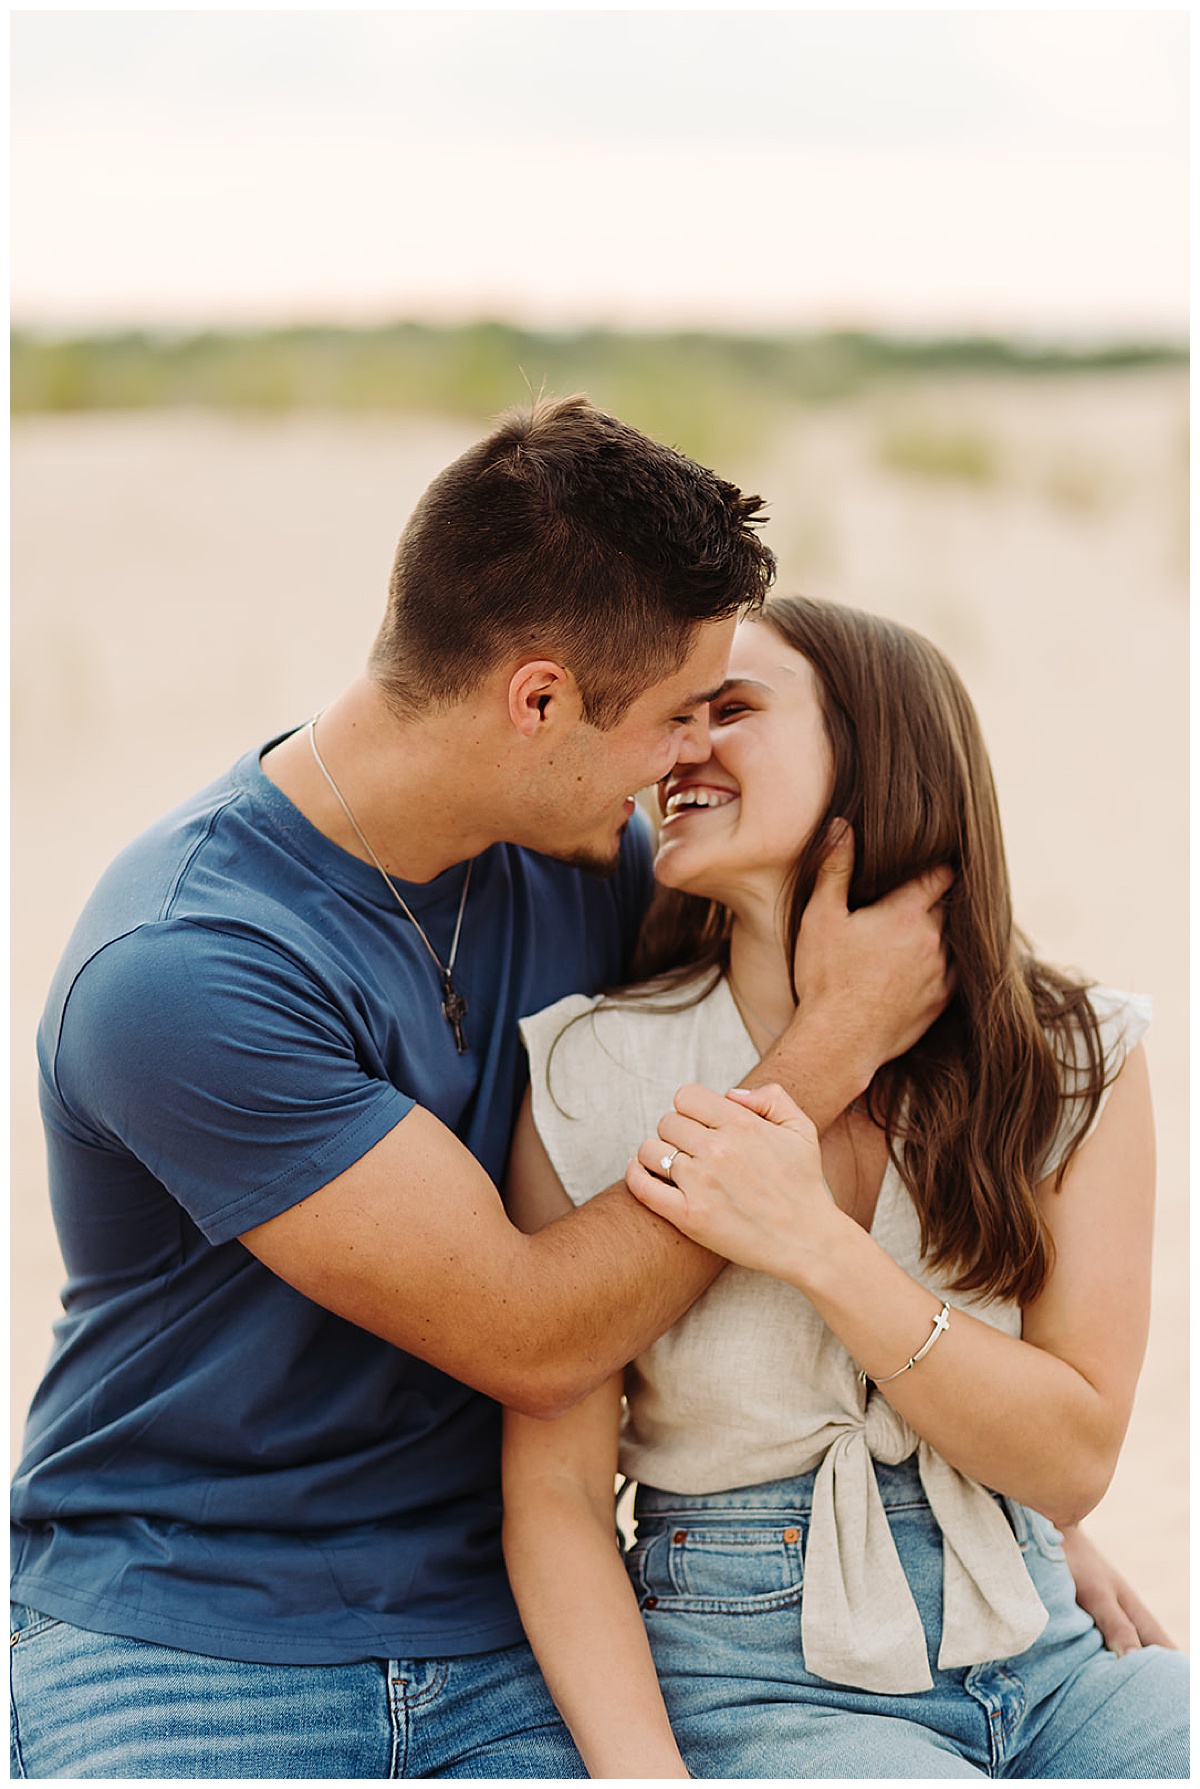 Man and woman smile together for Kayla Bouren Photography